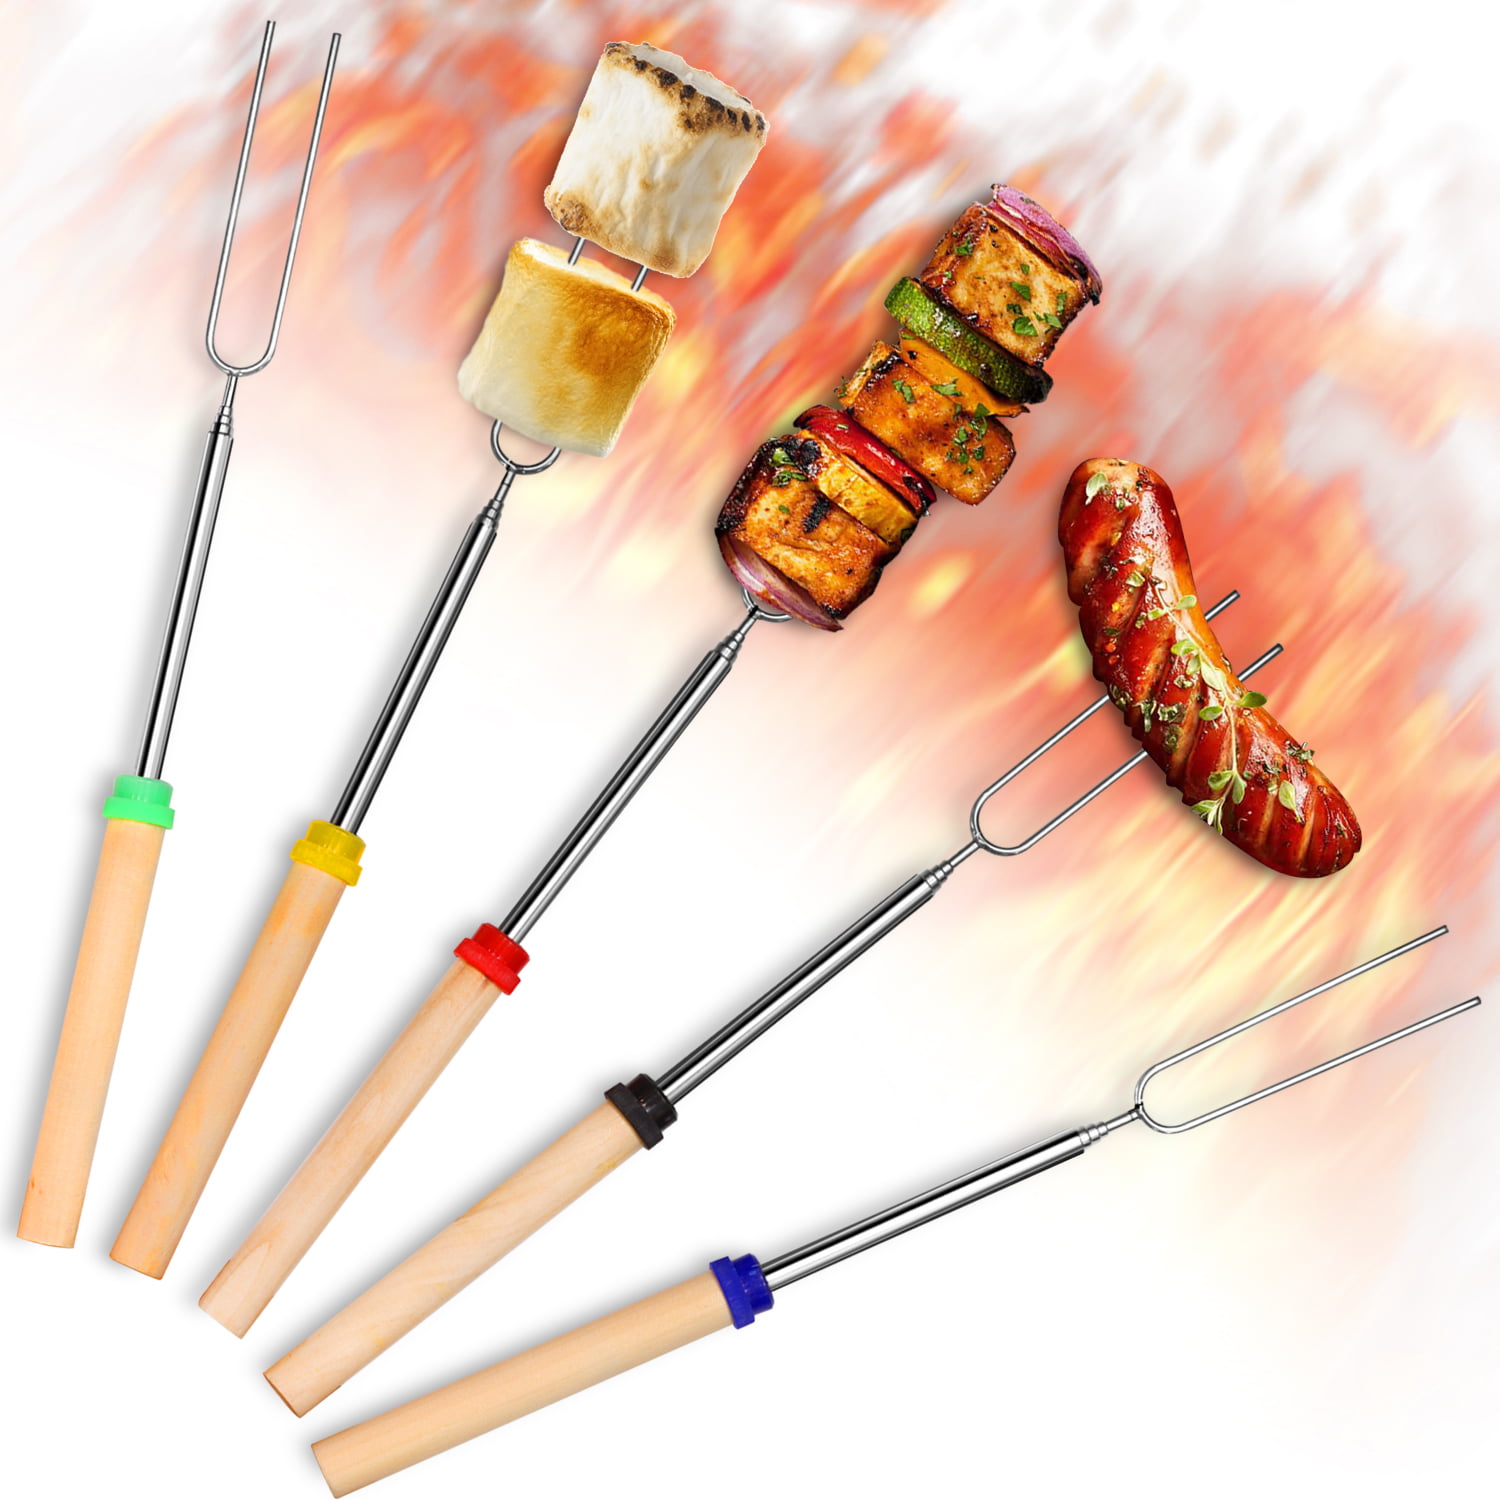 BBQ Kebab Skewers Stainless Steel U-Shaped Wooden Barbecue Grilling Forks 5pcs 